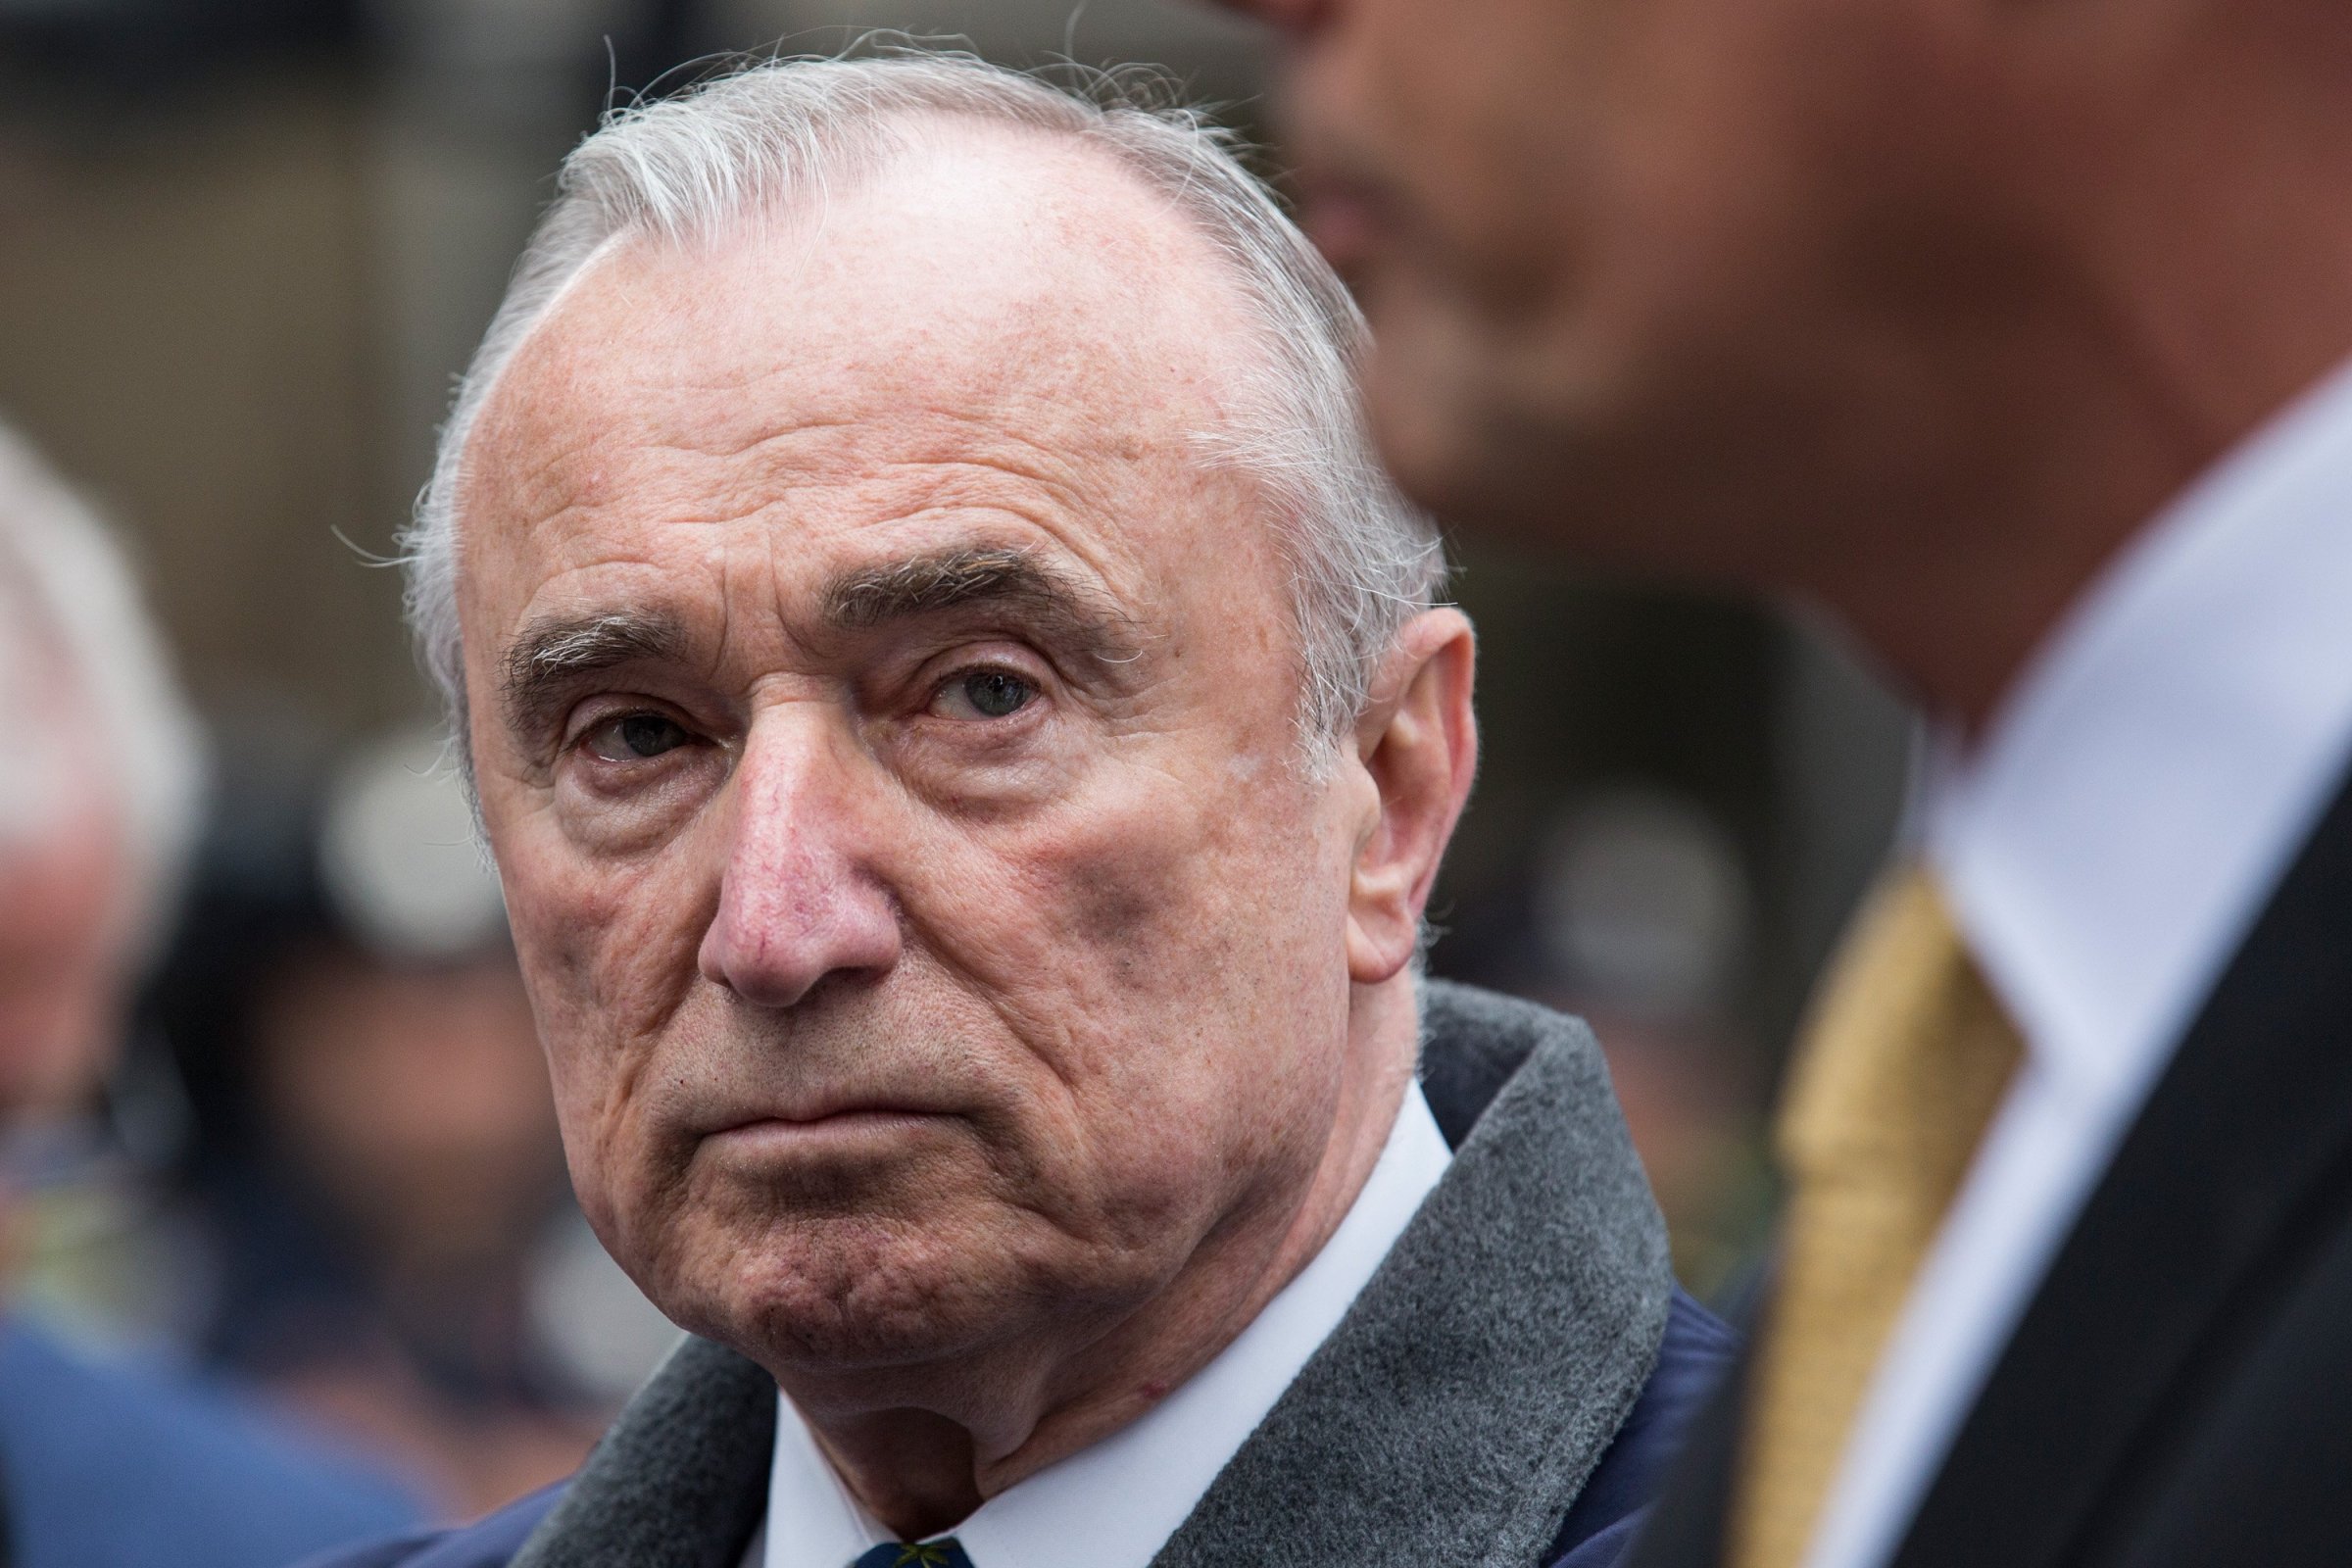 New York Police Department Commissioner Bill Bratton speaks at a press briefing after a hammer-wielding attacker assaulted a police officer on May 13, 2015 in New York City.